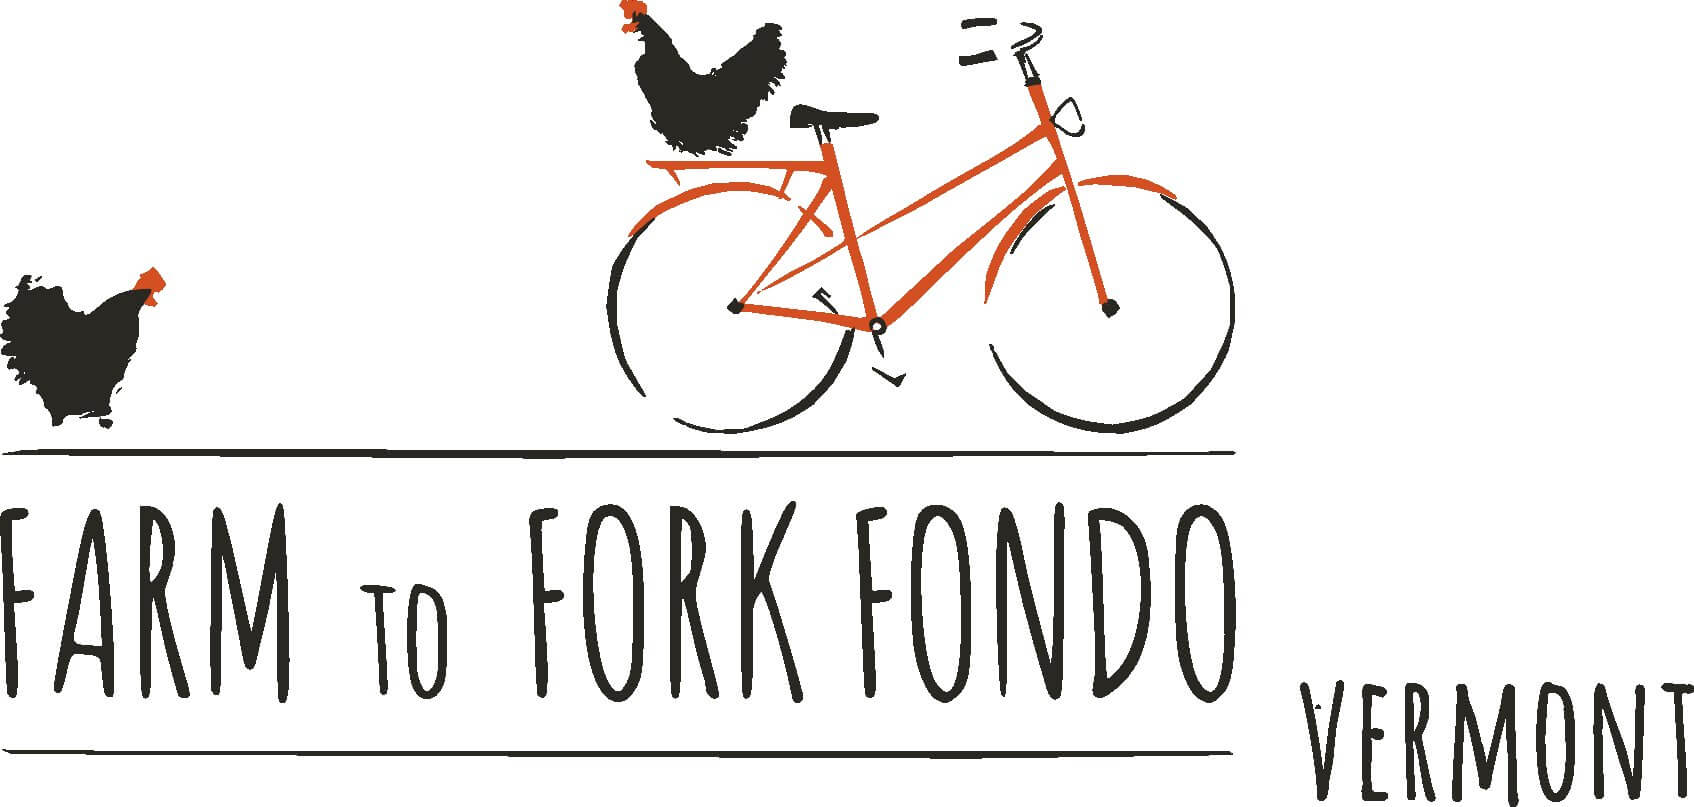 Jamis Bike Giveaway from The Farm to Fork Fondo – Vermont